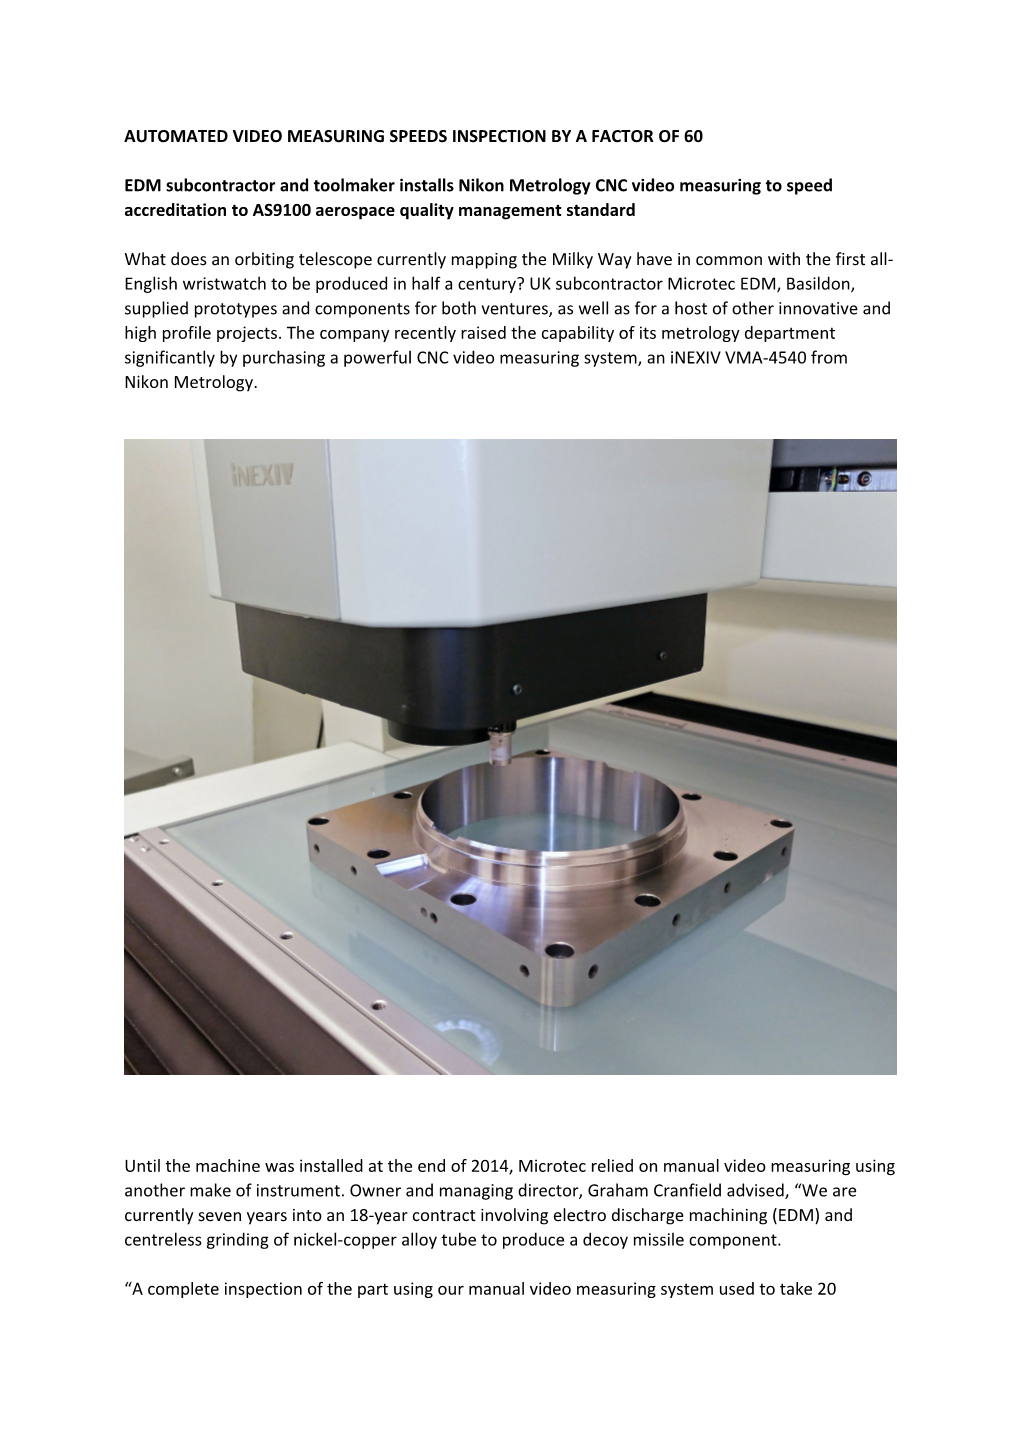 AUTOMATED VIDEO MEASURING SPEEDS INSPECTION by a FACTOR of 60 EDM Subcontractor and Toolmaker